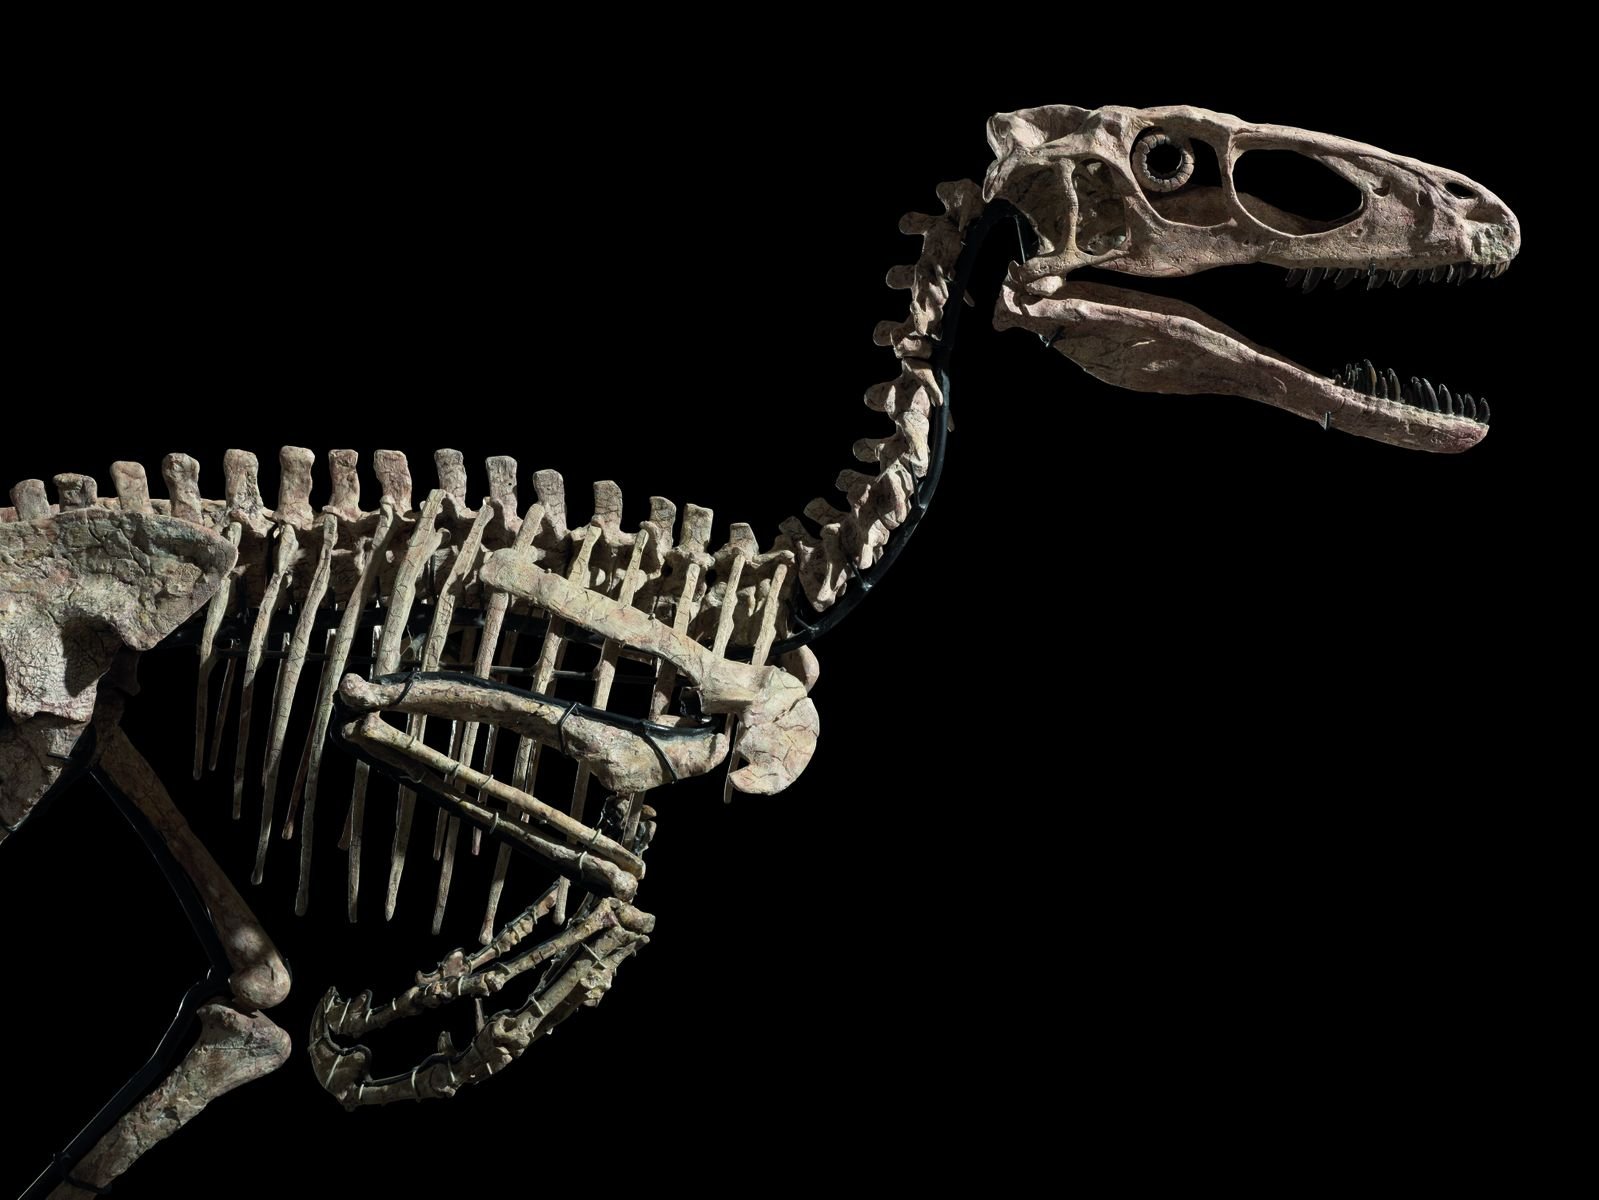 Should the Skeleton of a Dinosaur That Helped Inspire 'Jurassic